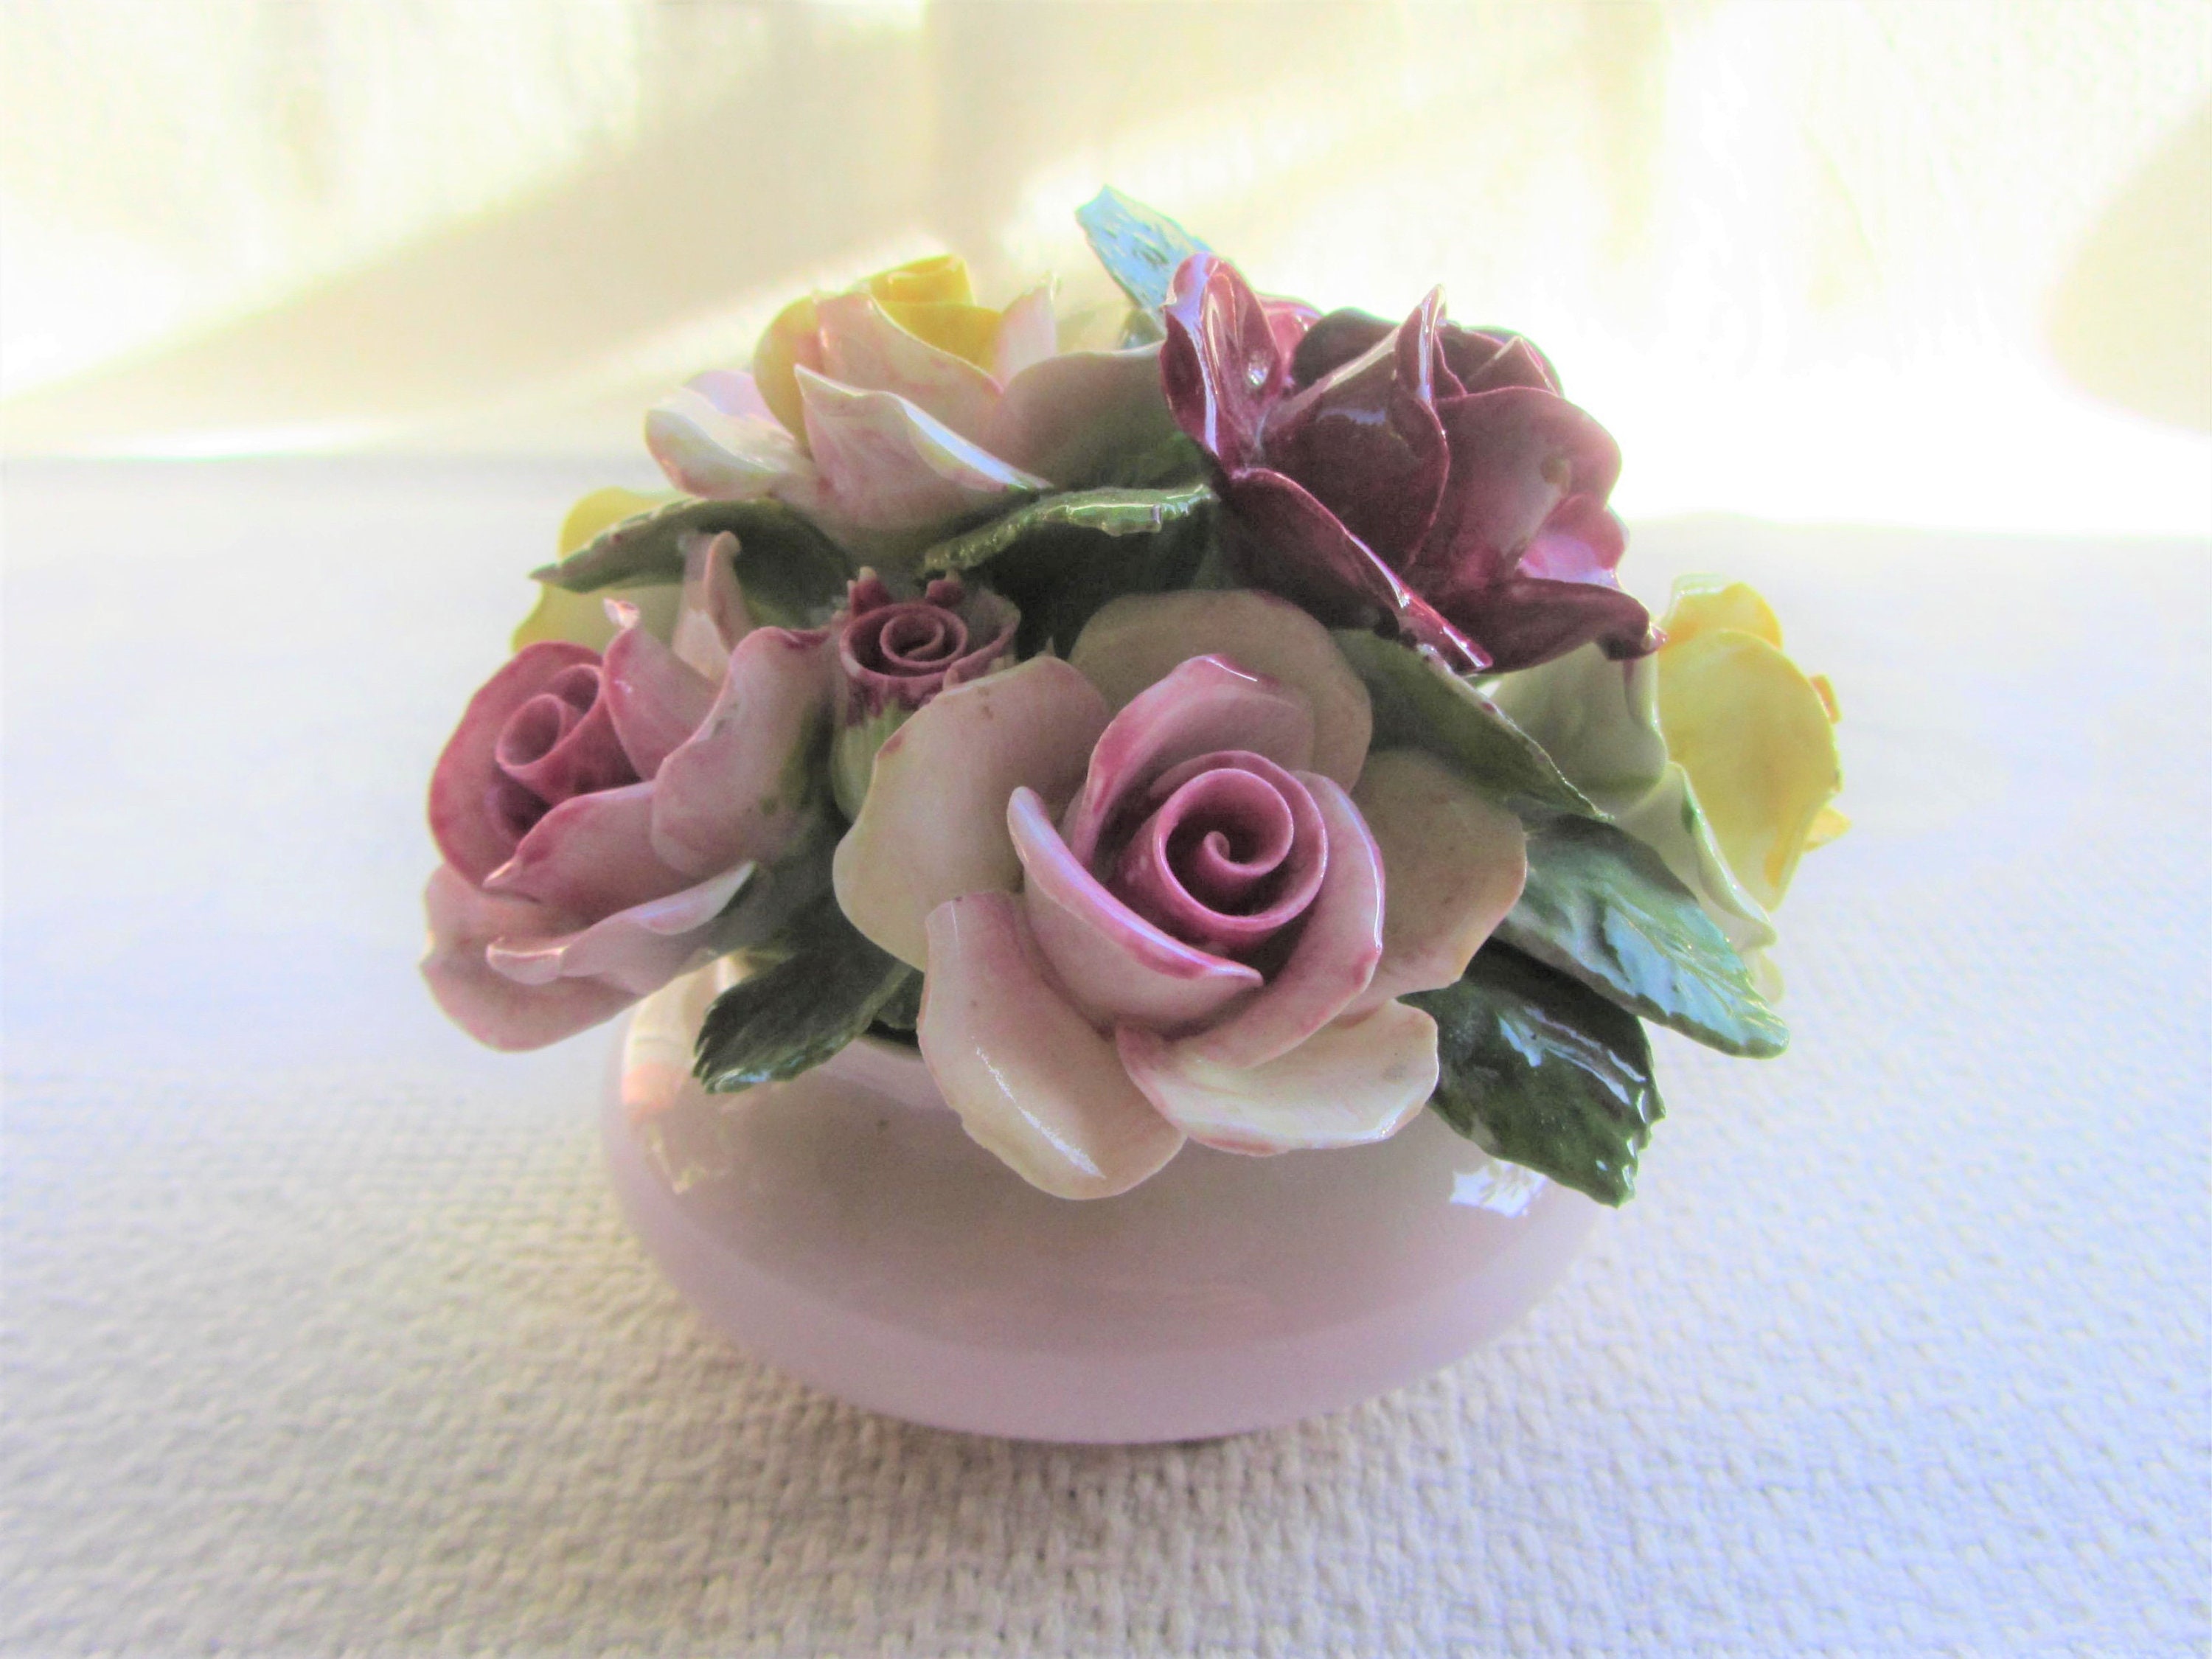 50's MOTHERS DAY Soft Pink Rose Bouquet Crown China Crafts